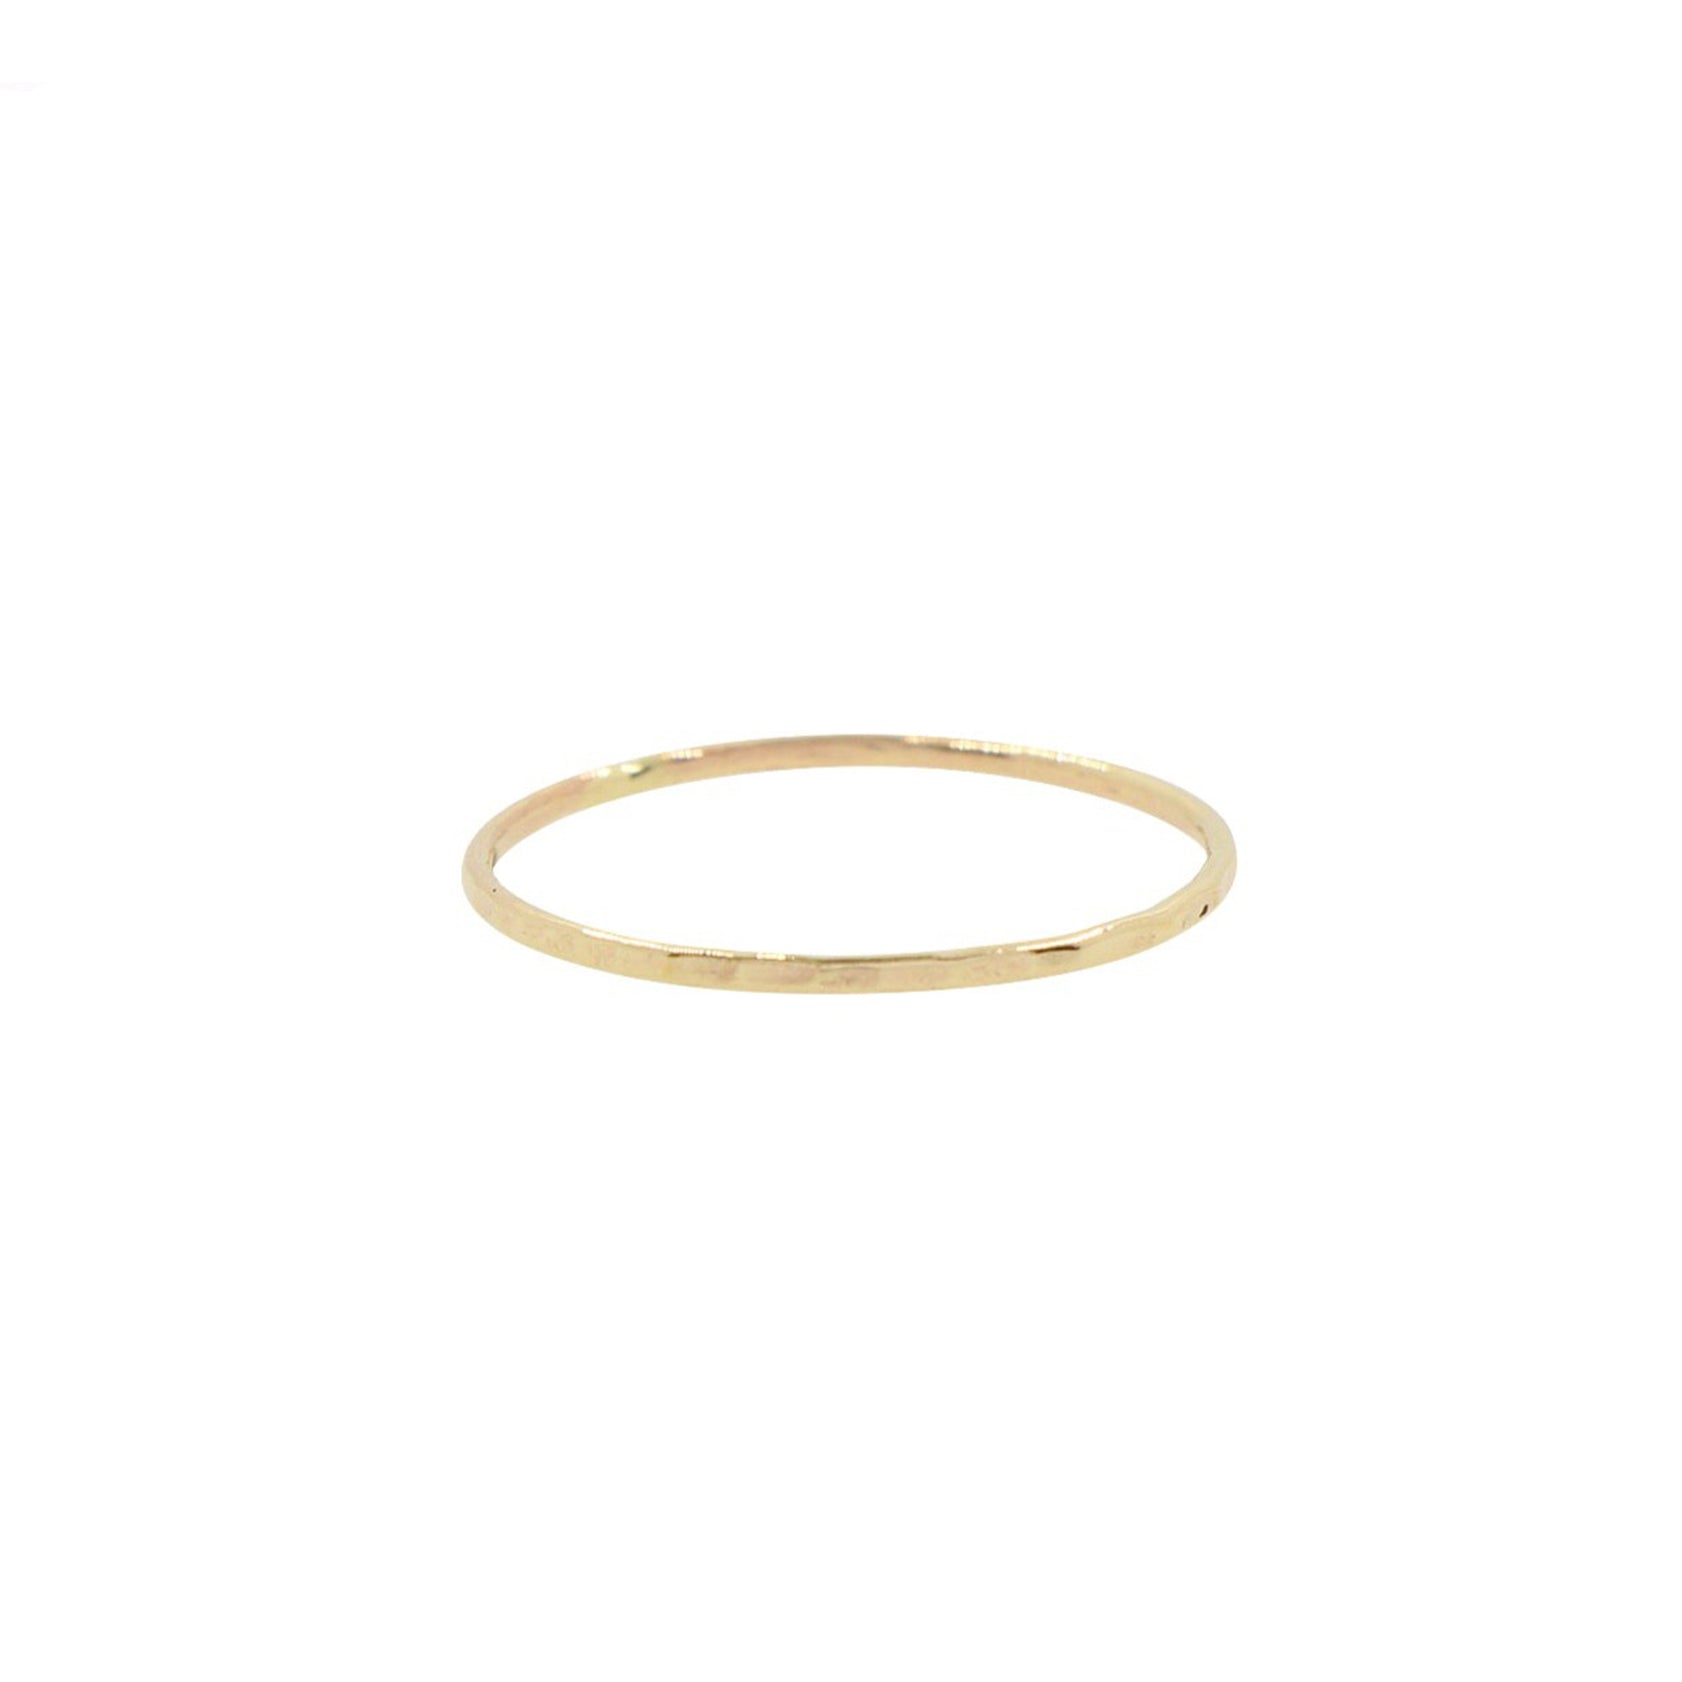 Shop Exquisite Gold Hammer Wave Ring